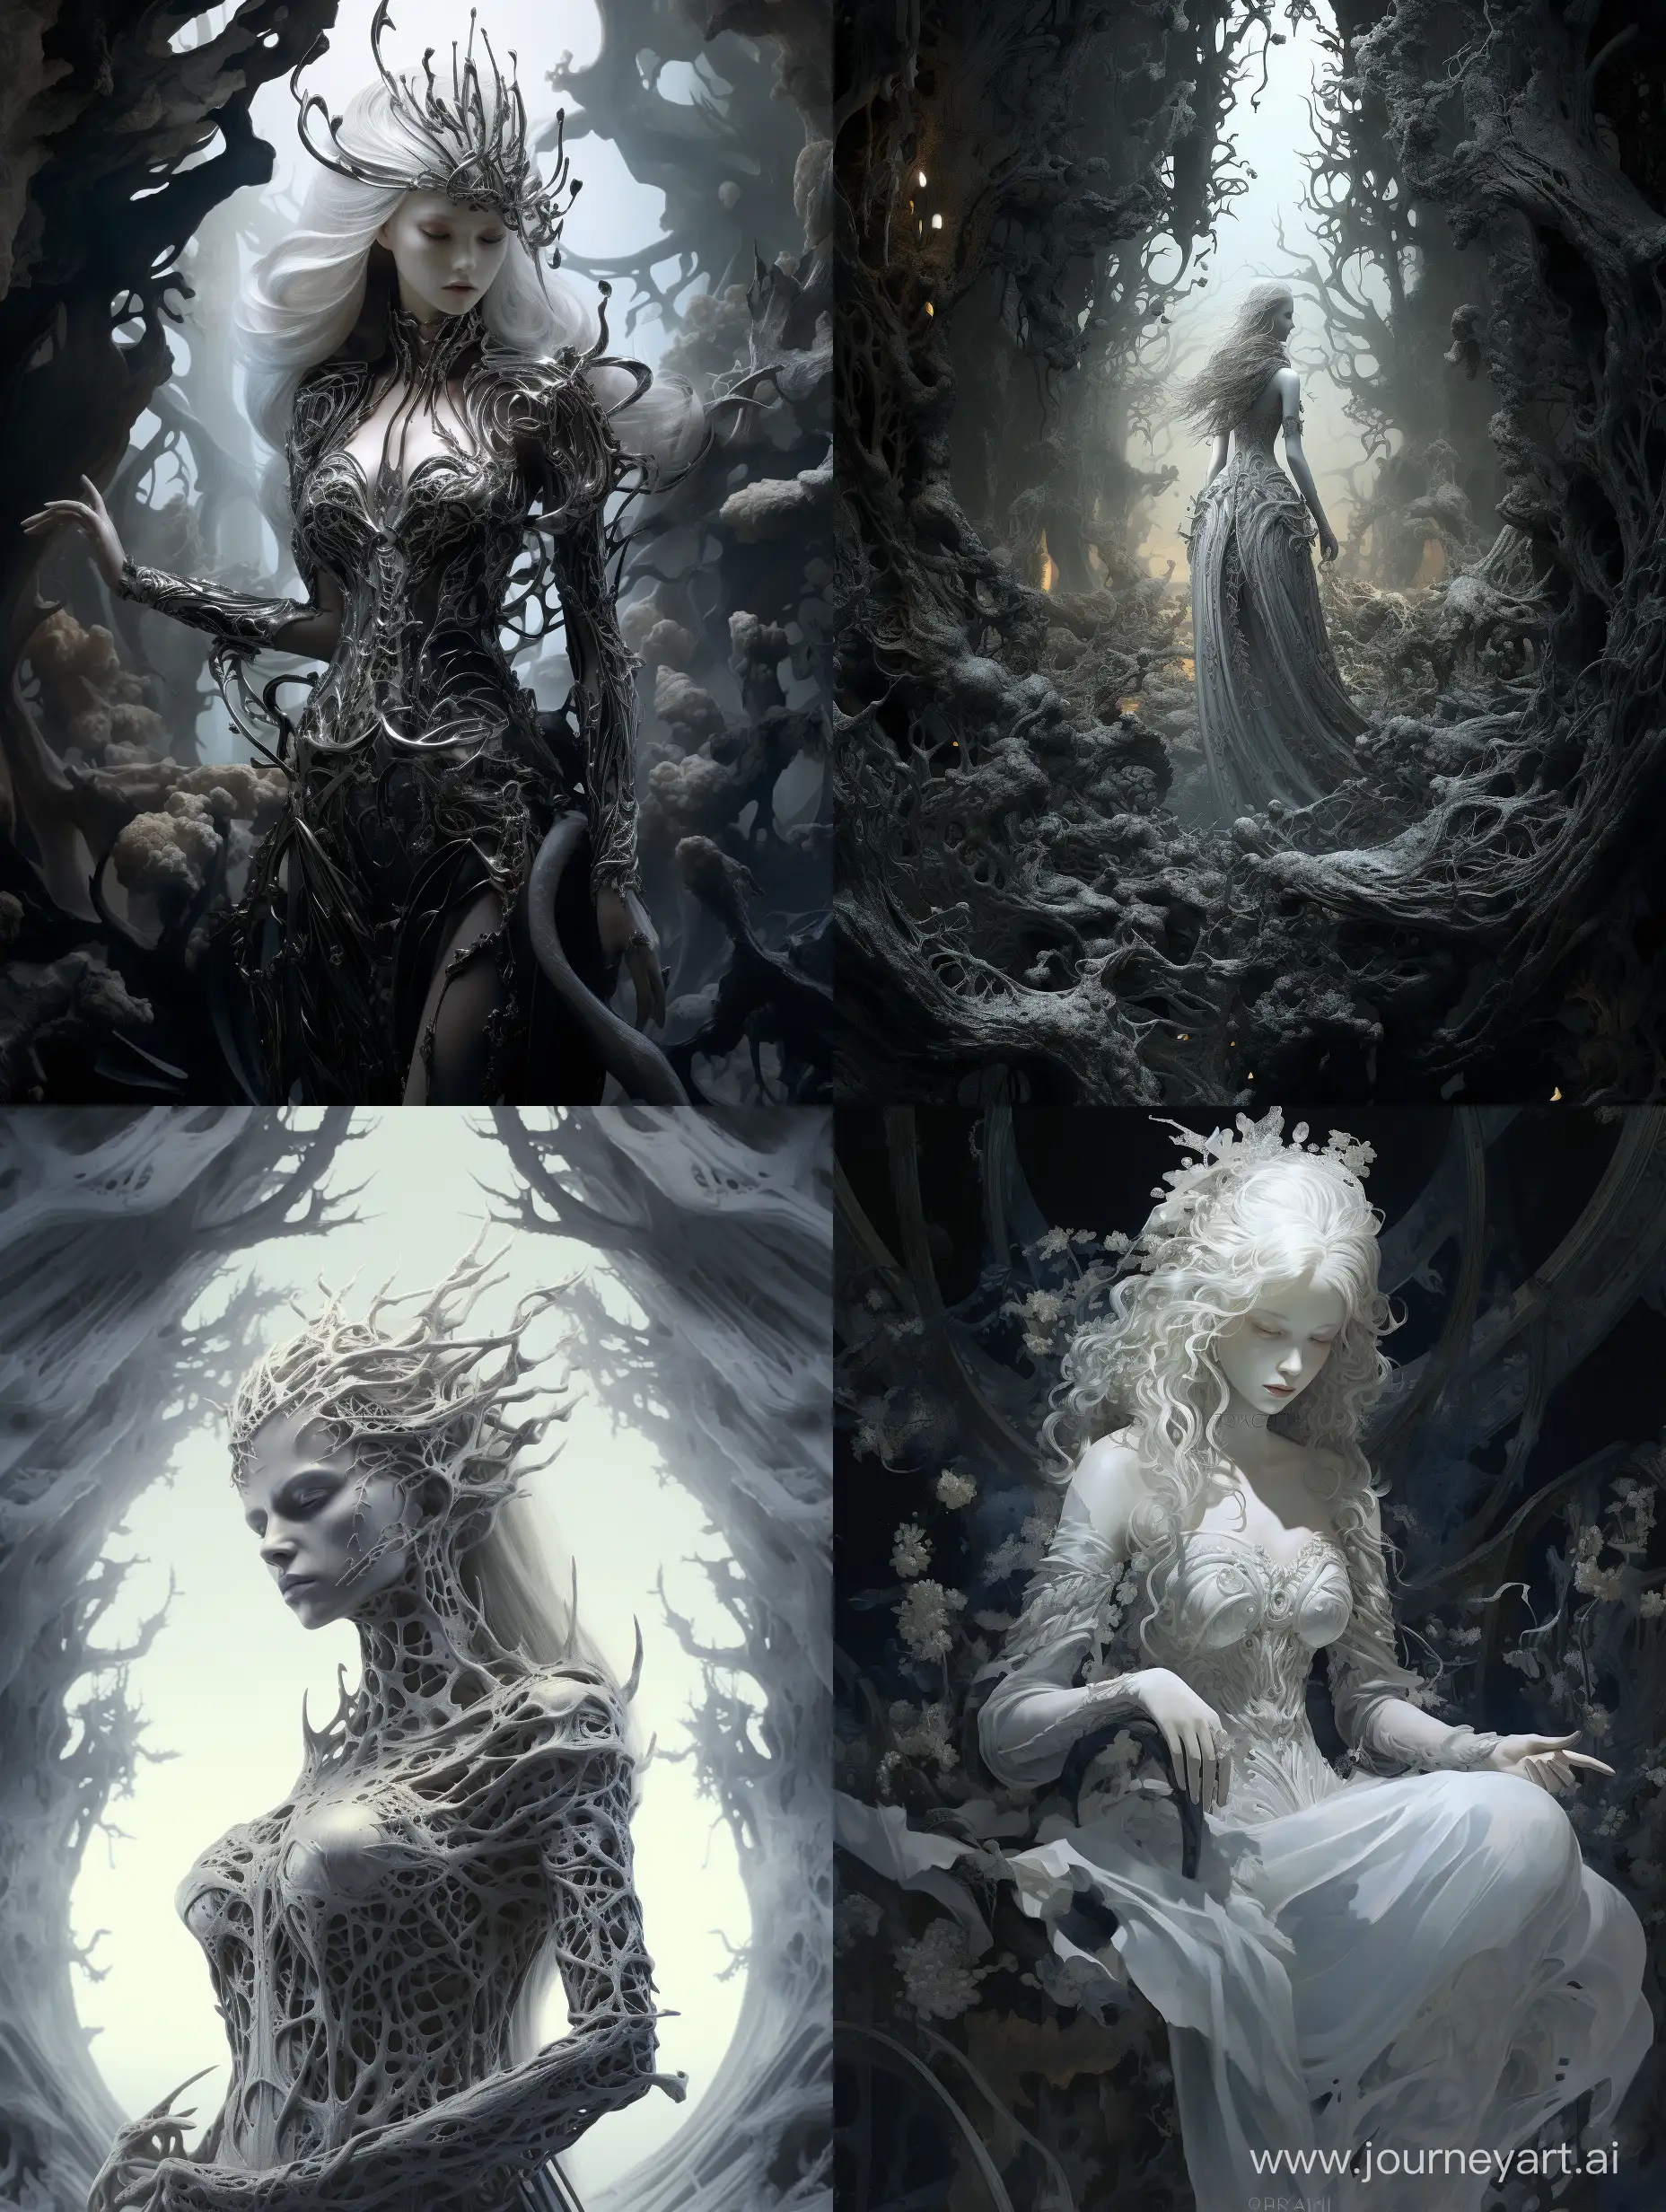 Ephemeral, ghostly apparitions of a beautiful spectral woman, dressed in flowing, tattered garments playing a large ornately detailed harp on a creepy misty forest :: 16k :: high contrast extremely details, 16k resolution, intricate 